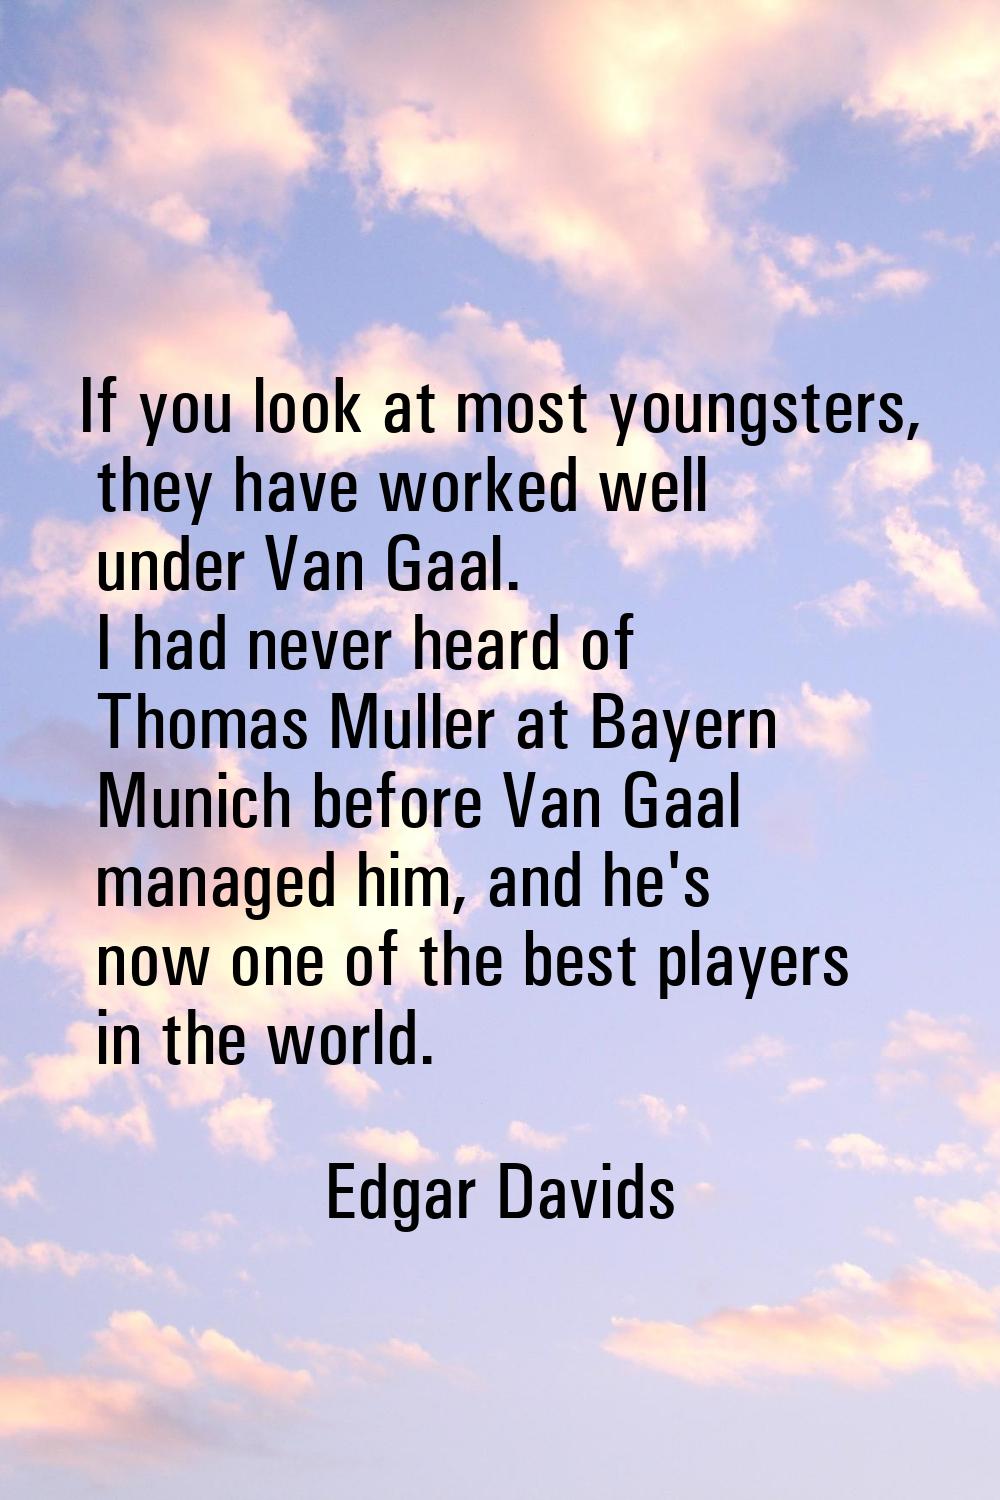 If you look at most youngsters, they have worked well under Van Gaal. I had never heard of Thomas M